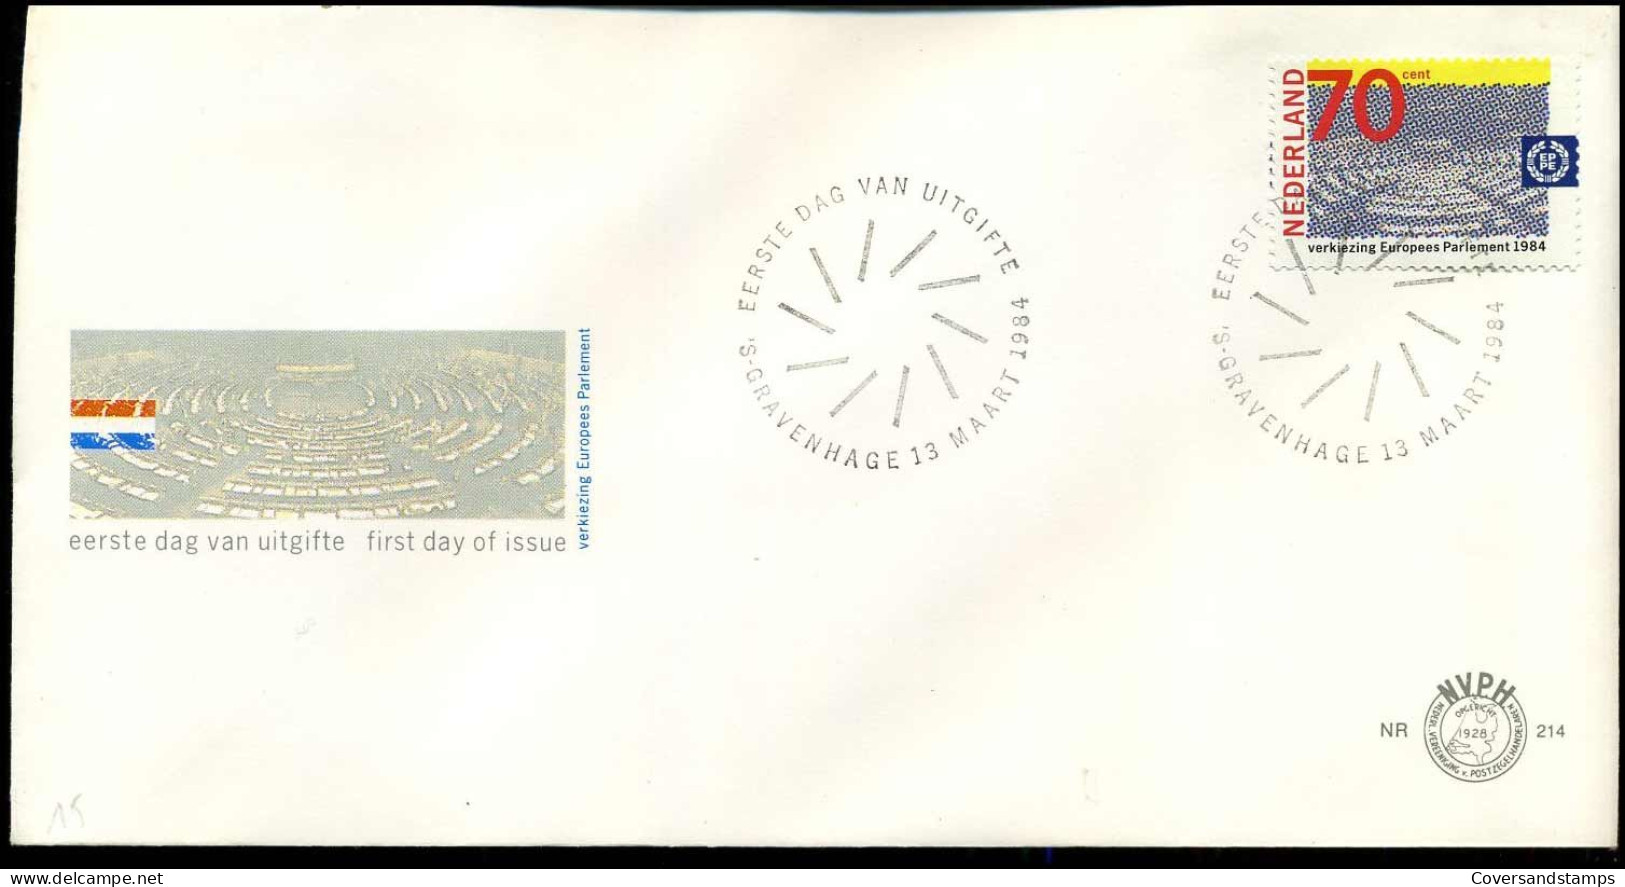 FDC -  Verkiezing Europees Parlement 1984 - FDC